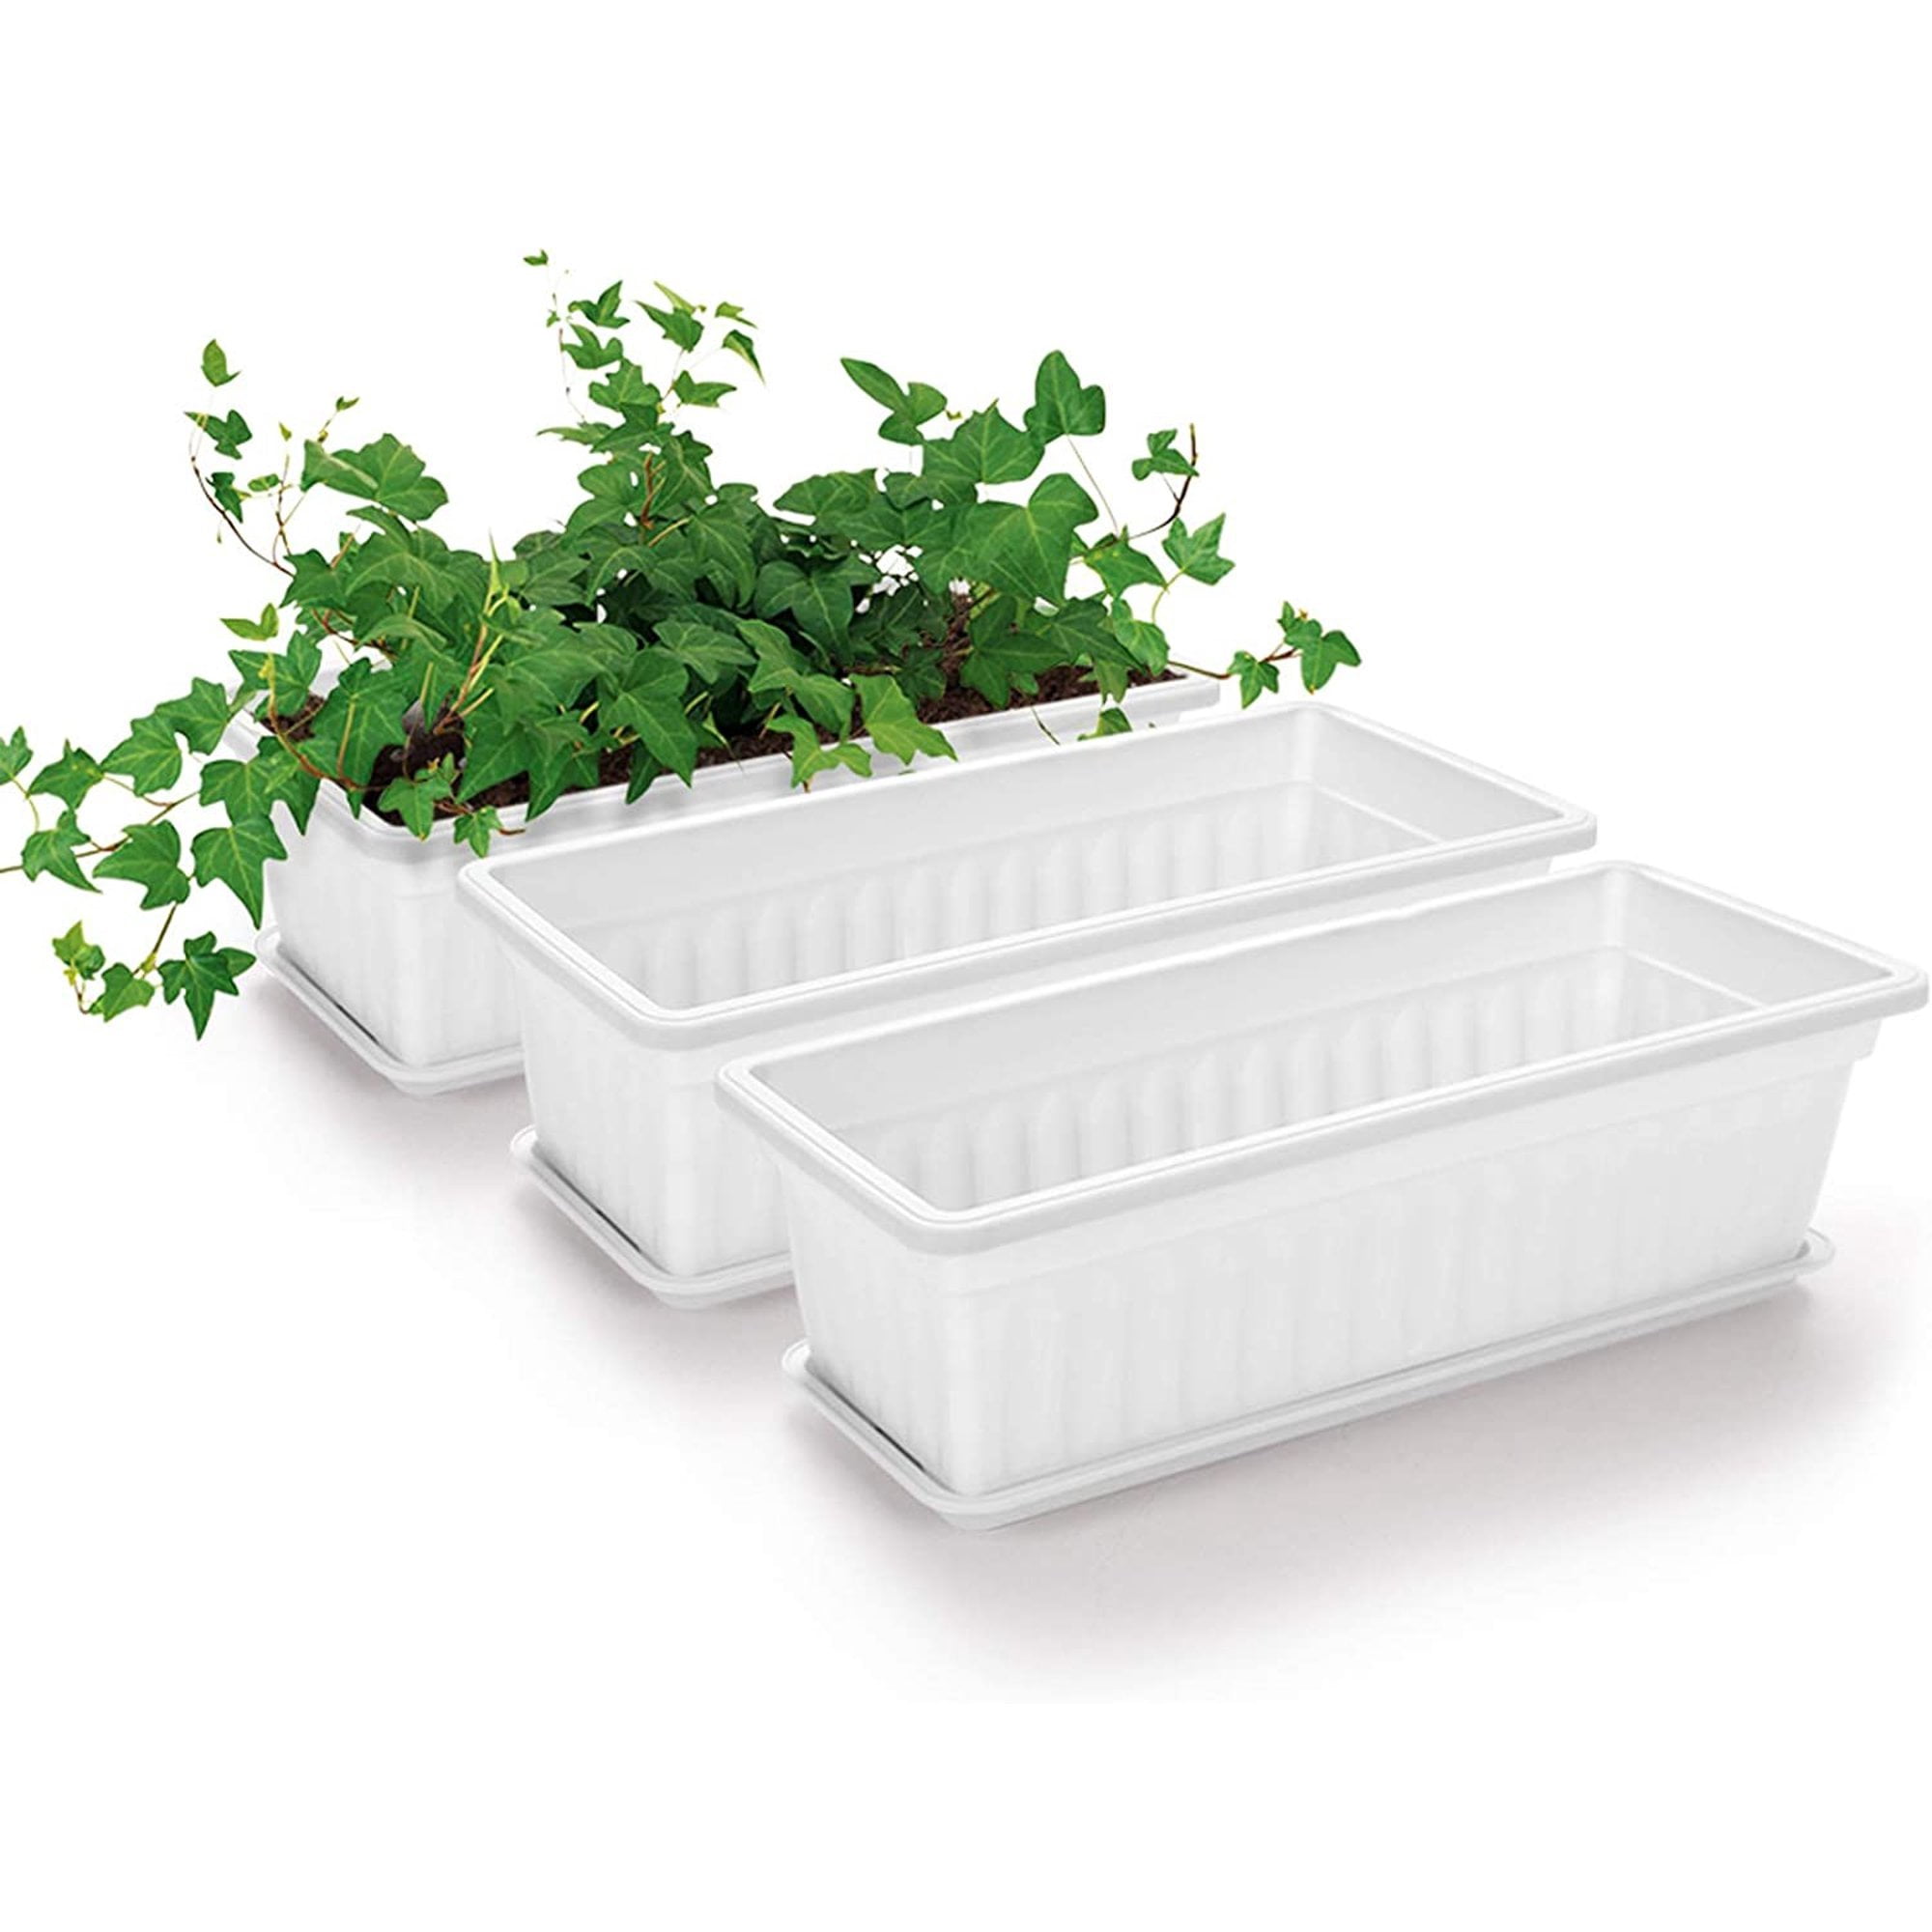 3 Pack Rectangle Planters for Indoor Large Vegetable Flower Herb Window Boxes, Plastic Growing Pots with Tray for House Windowsill Balcony Garden, White - Walmart.com